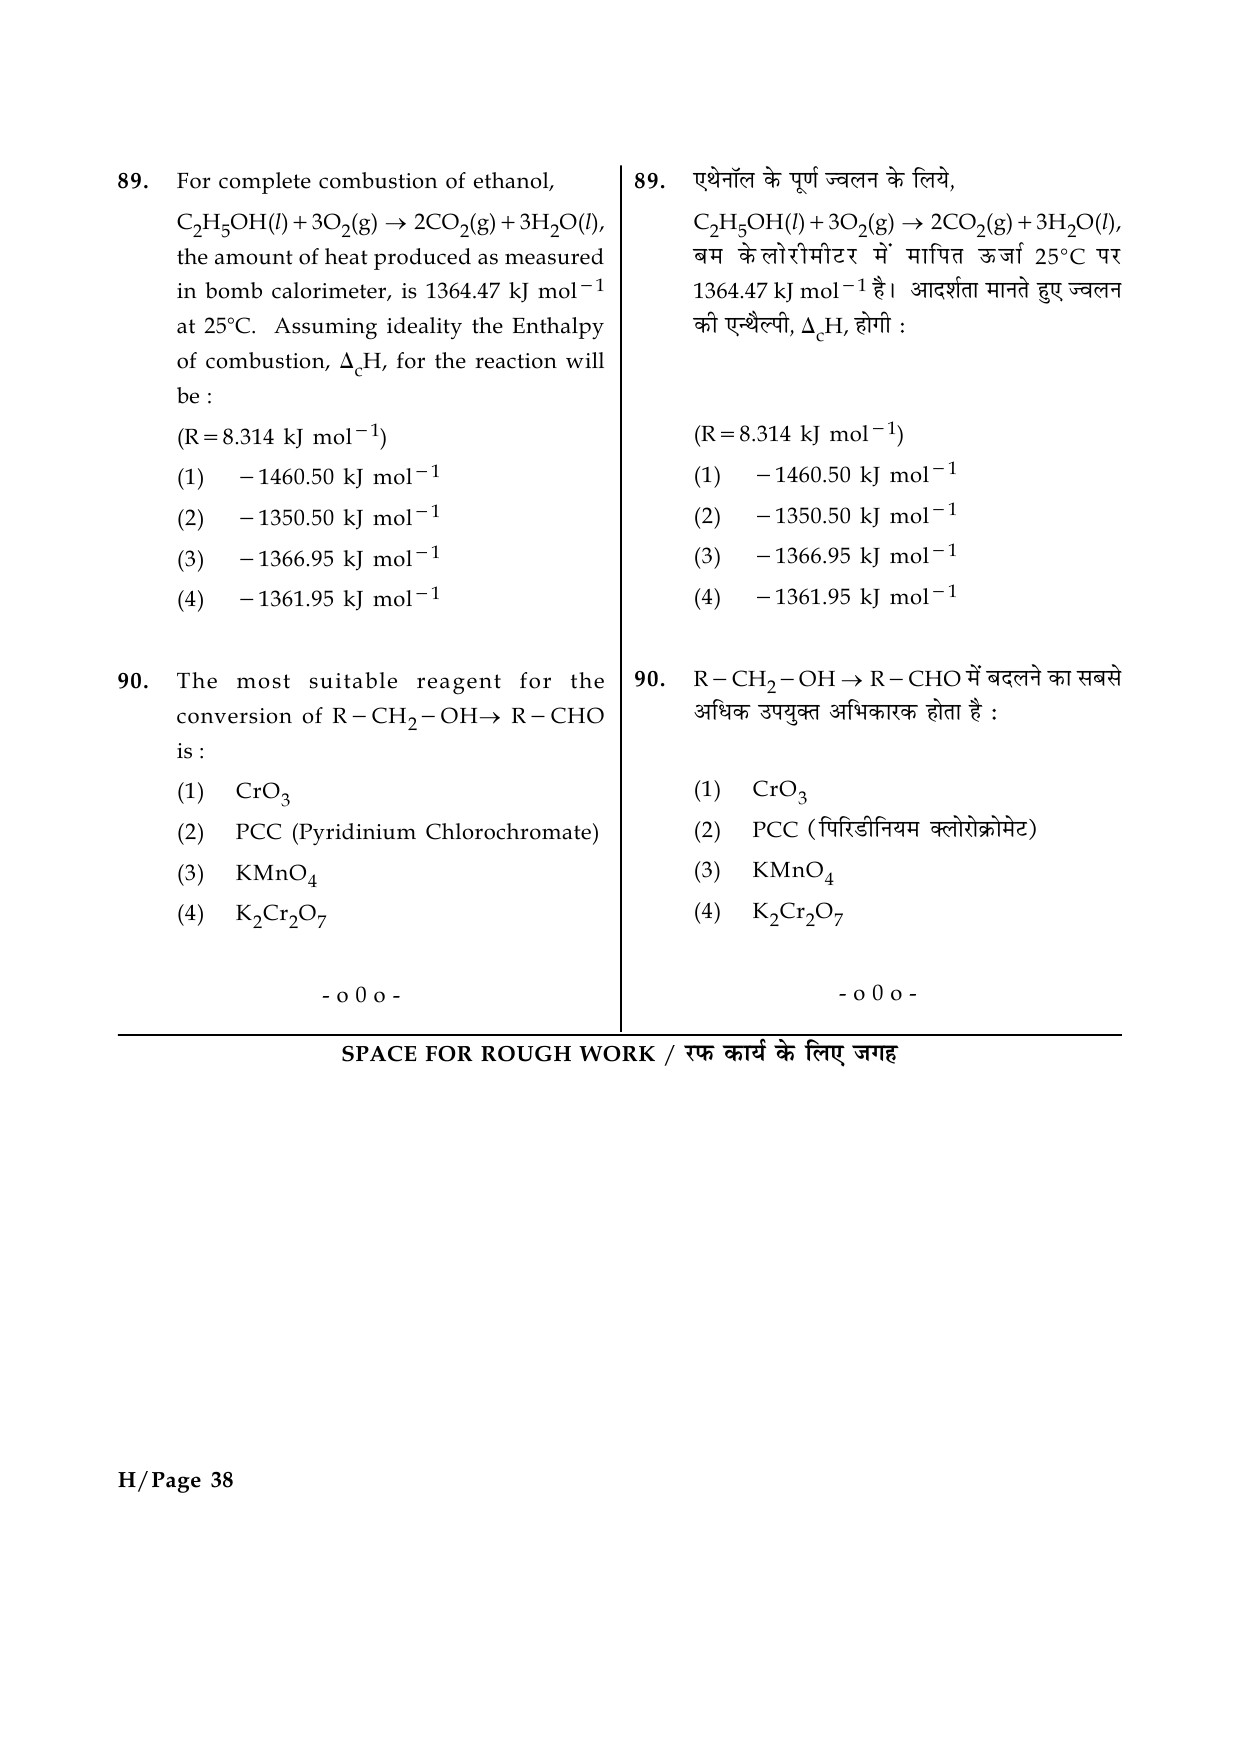 JEE Main Exam Question Paper 2014 Booklet H 38